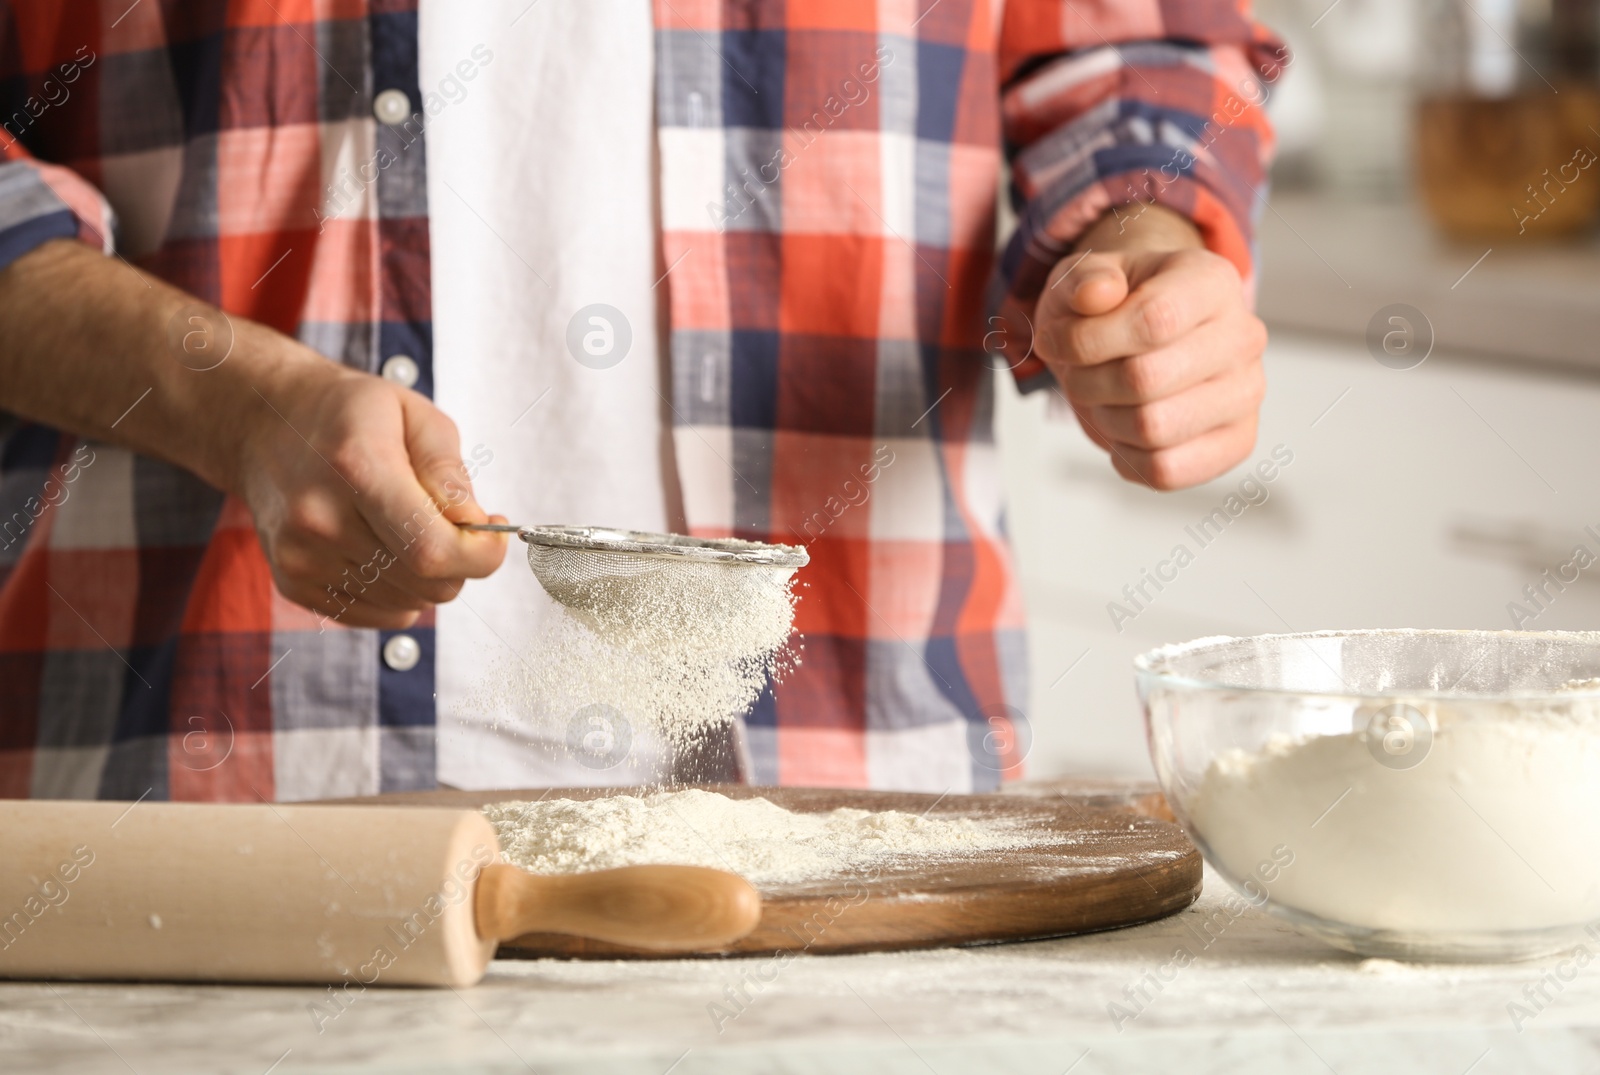 Photo of Man sprinkling flour over board on table in kitchen